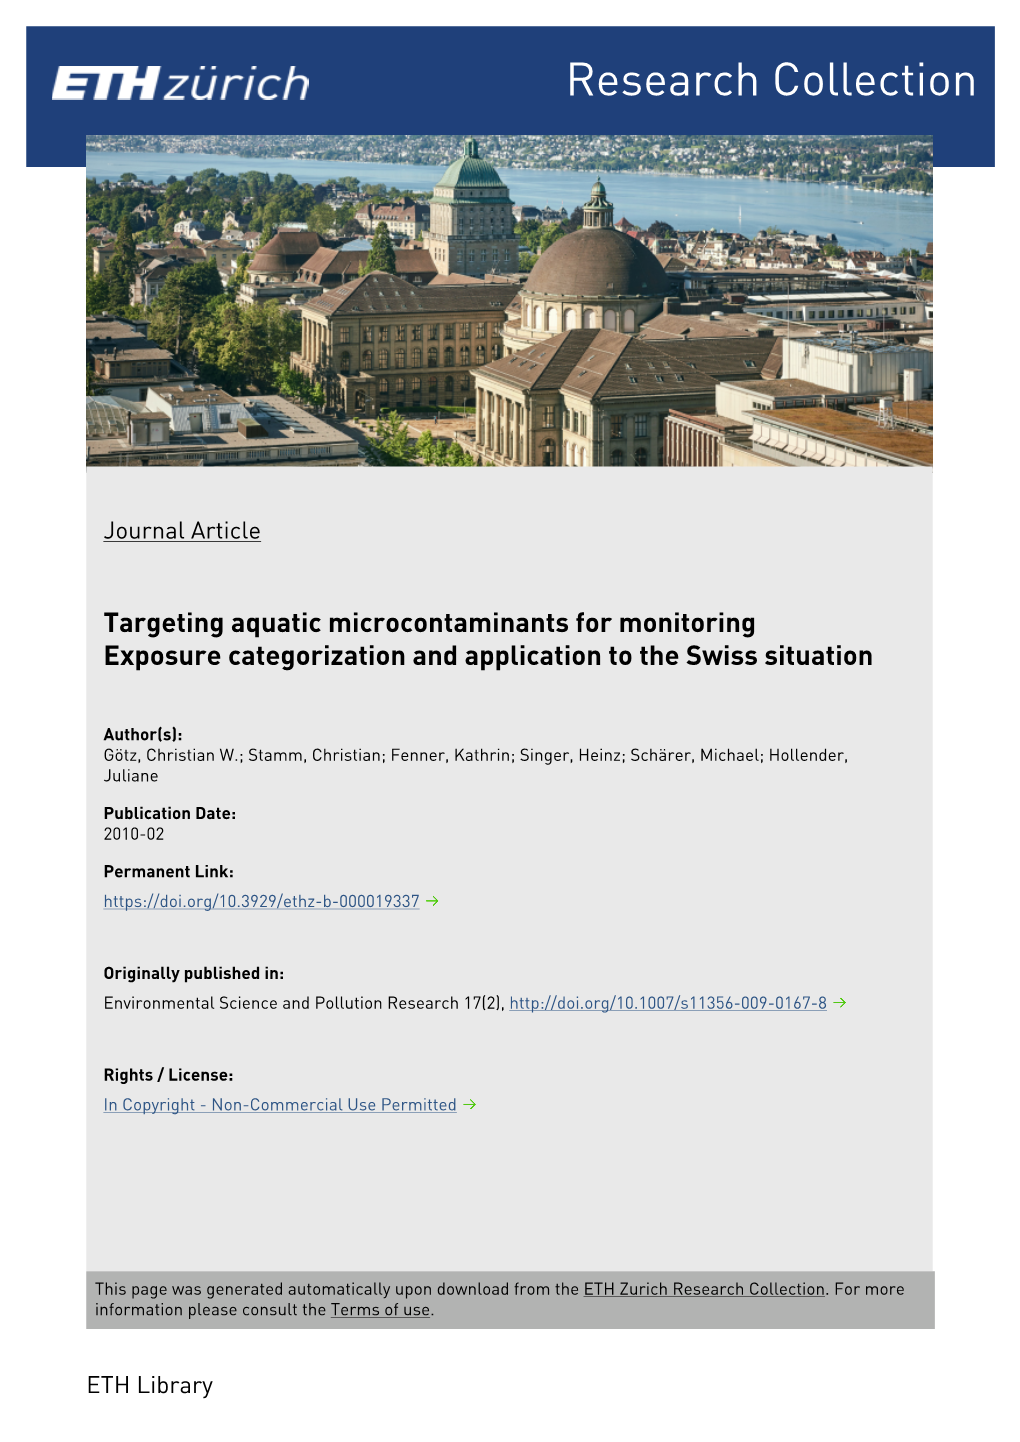 Targeting Aquatic Microcontaminants for Monitoring Exposure Categorization and Application to the Swiss Situation